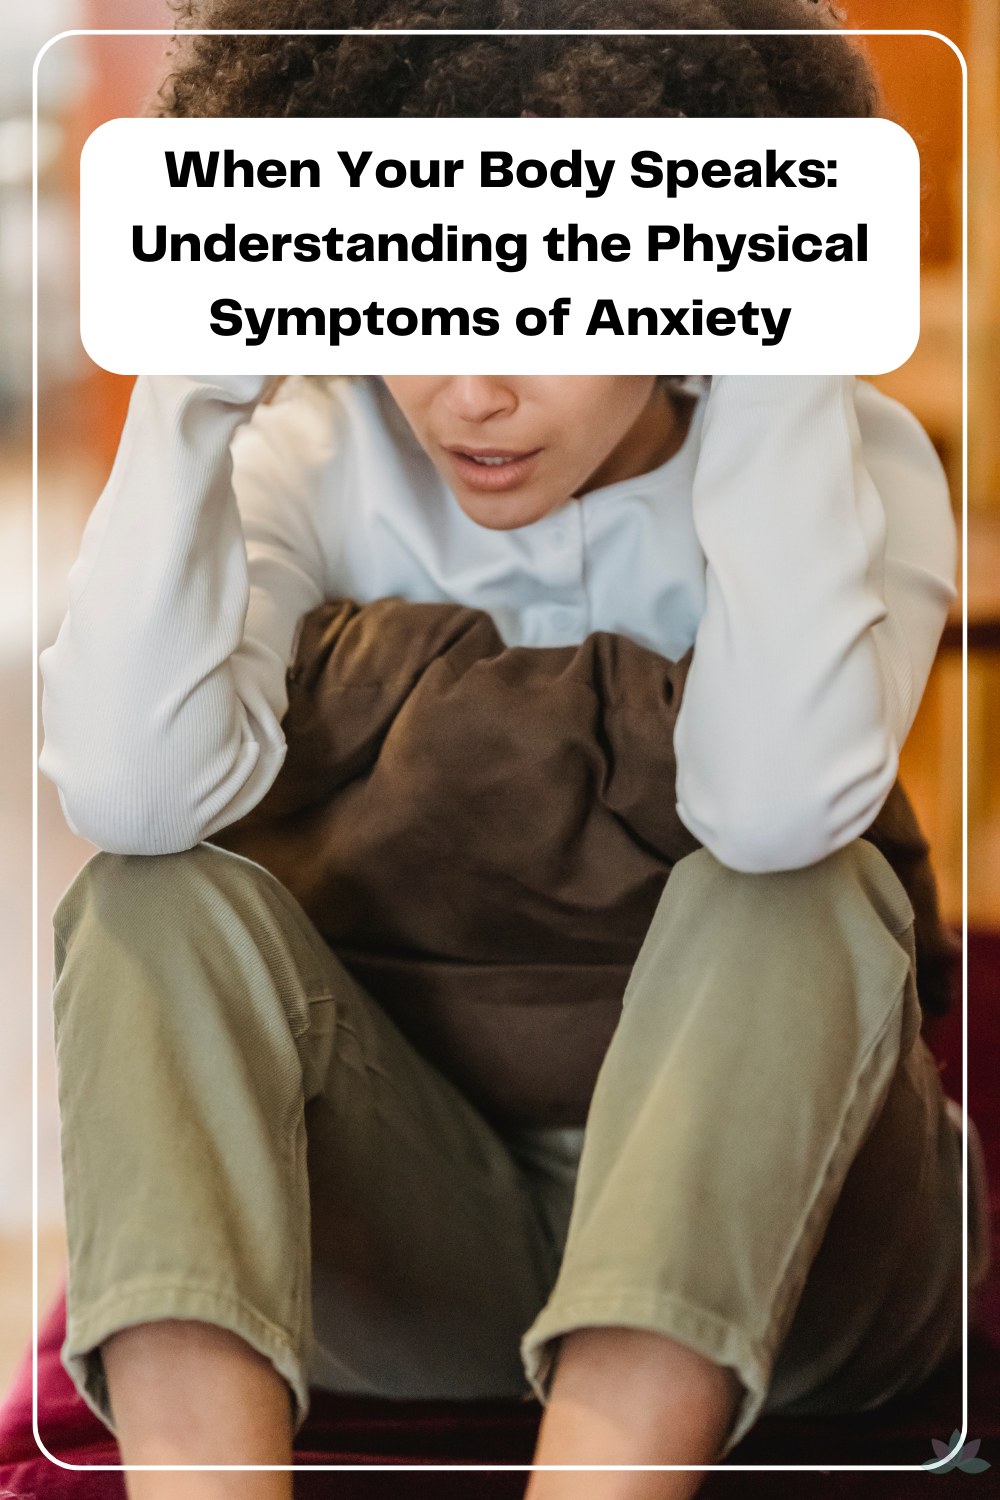 When Your Body Speaks: Understanding the Physical Symptoms of Anxiety